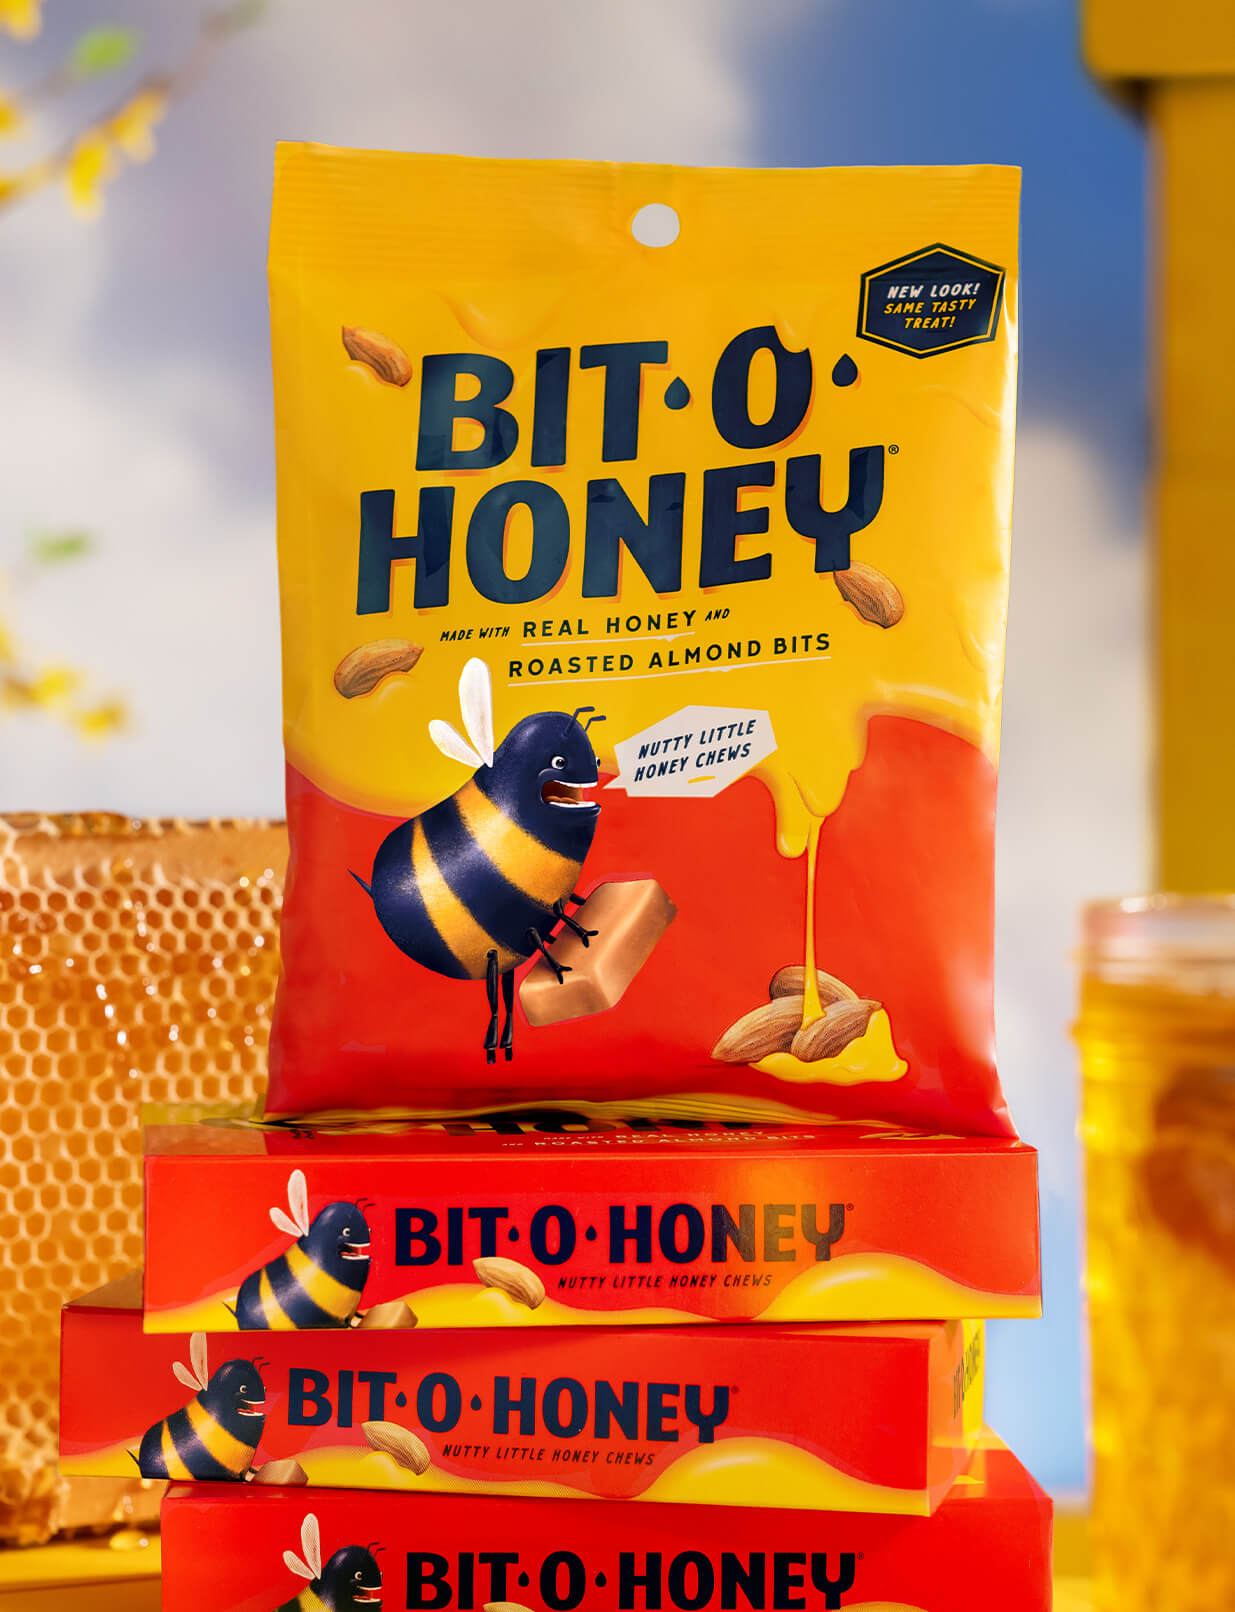 Bag of Bit-O-Honey candies stacked on top of three Bit-O-Honey boxes